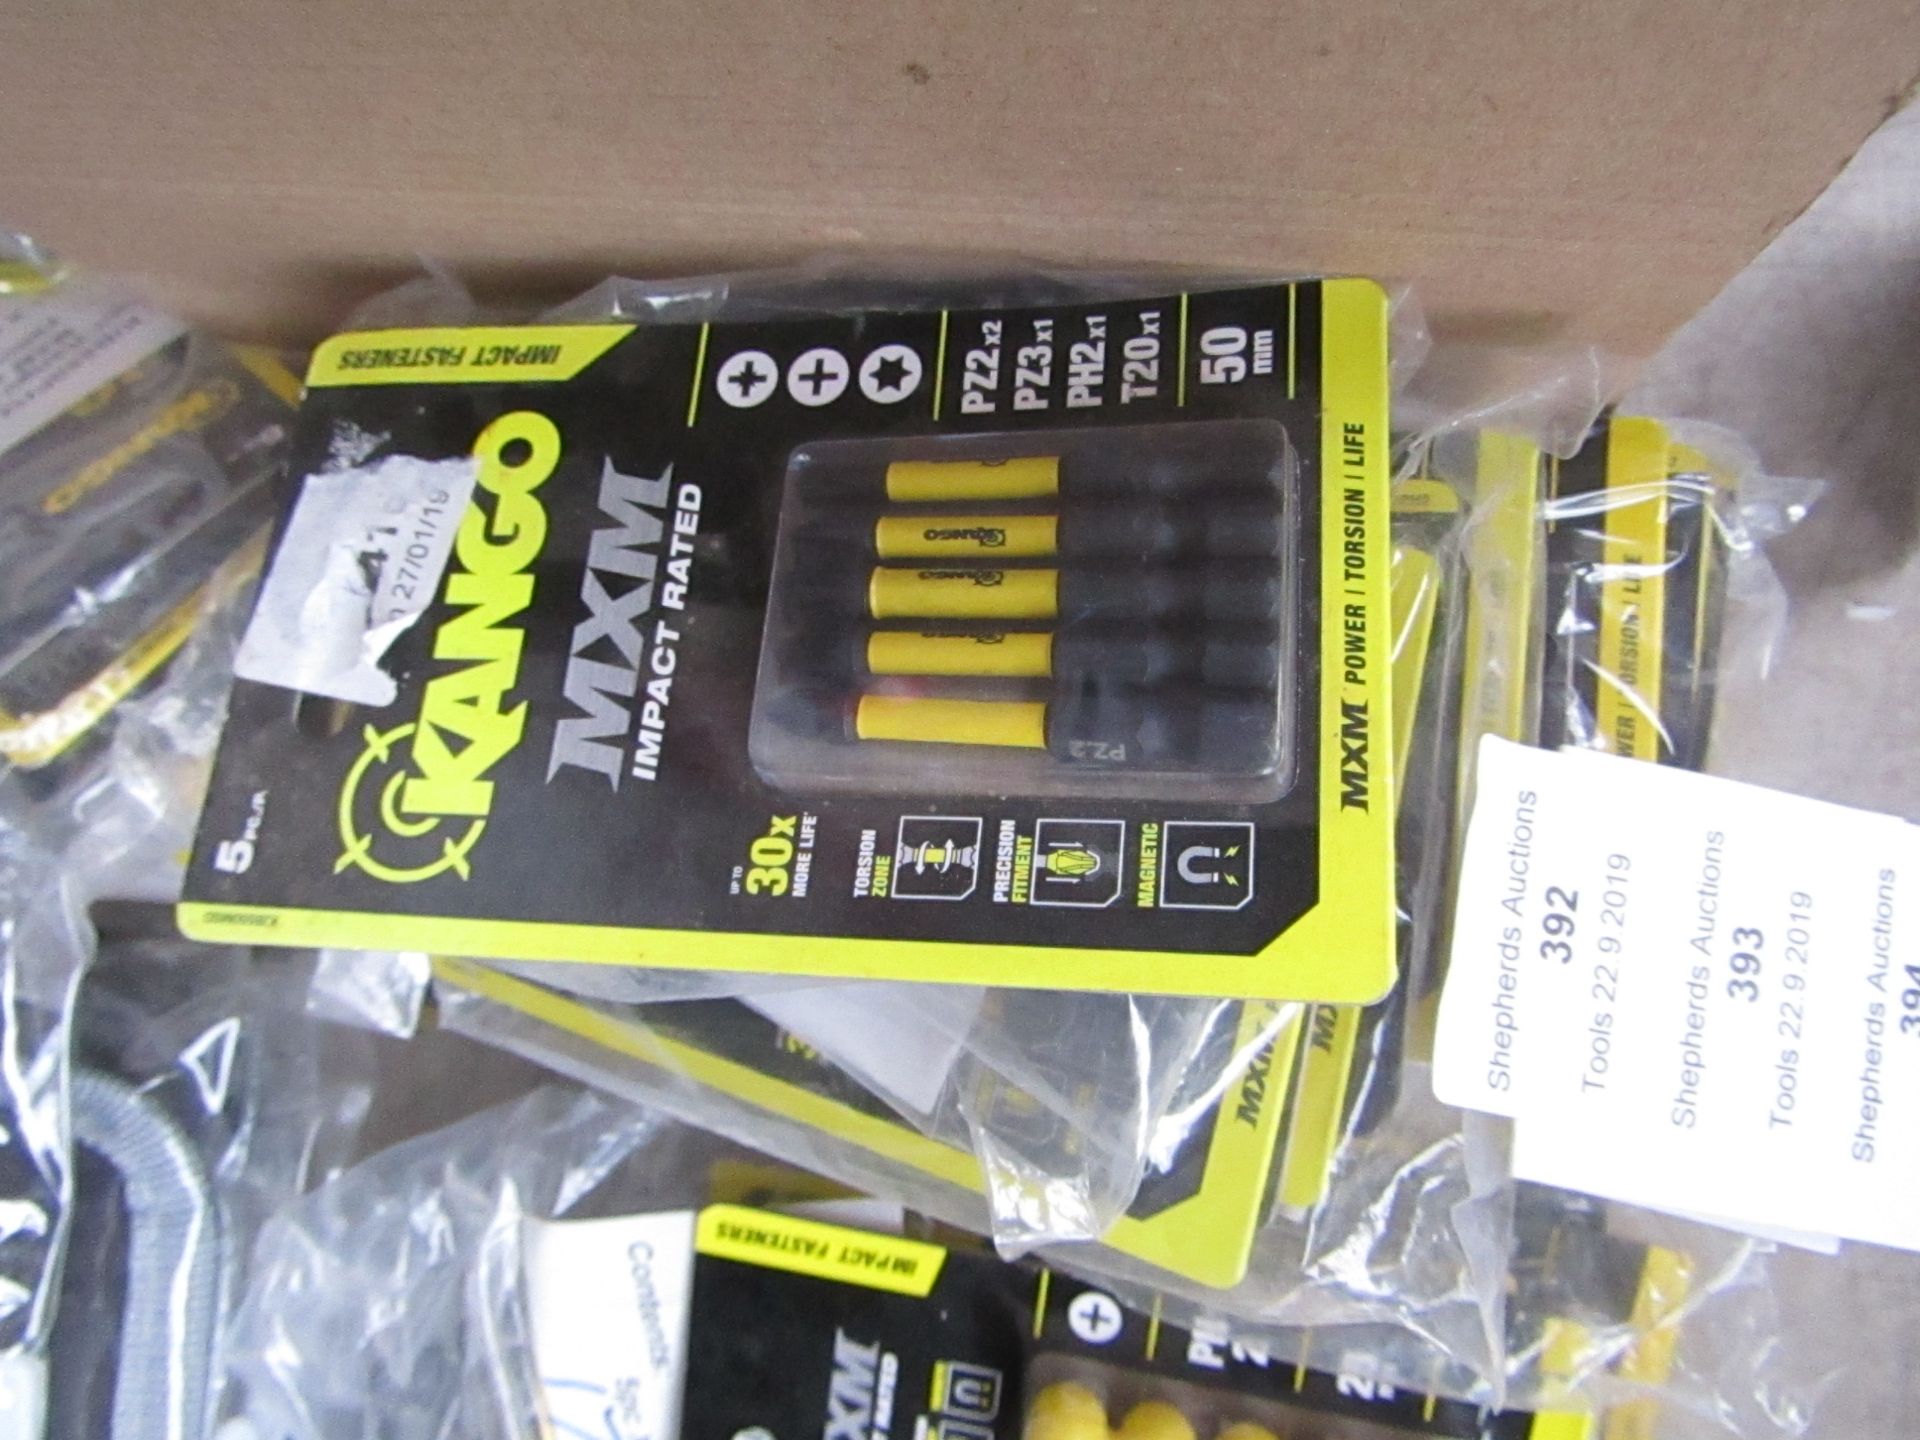 A Pack of Kango MXM Impact rated PH2 Driver Bits new in packaging, the pack contains 5 Bits